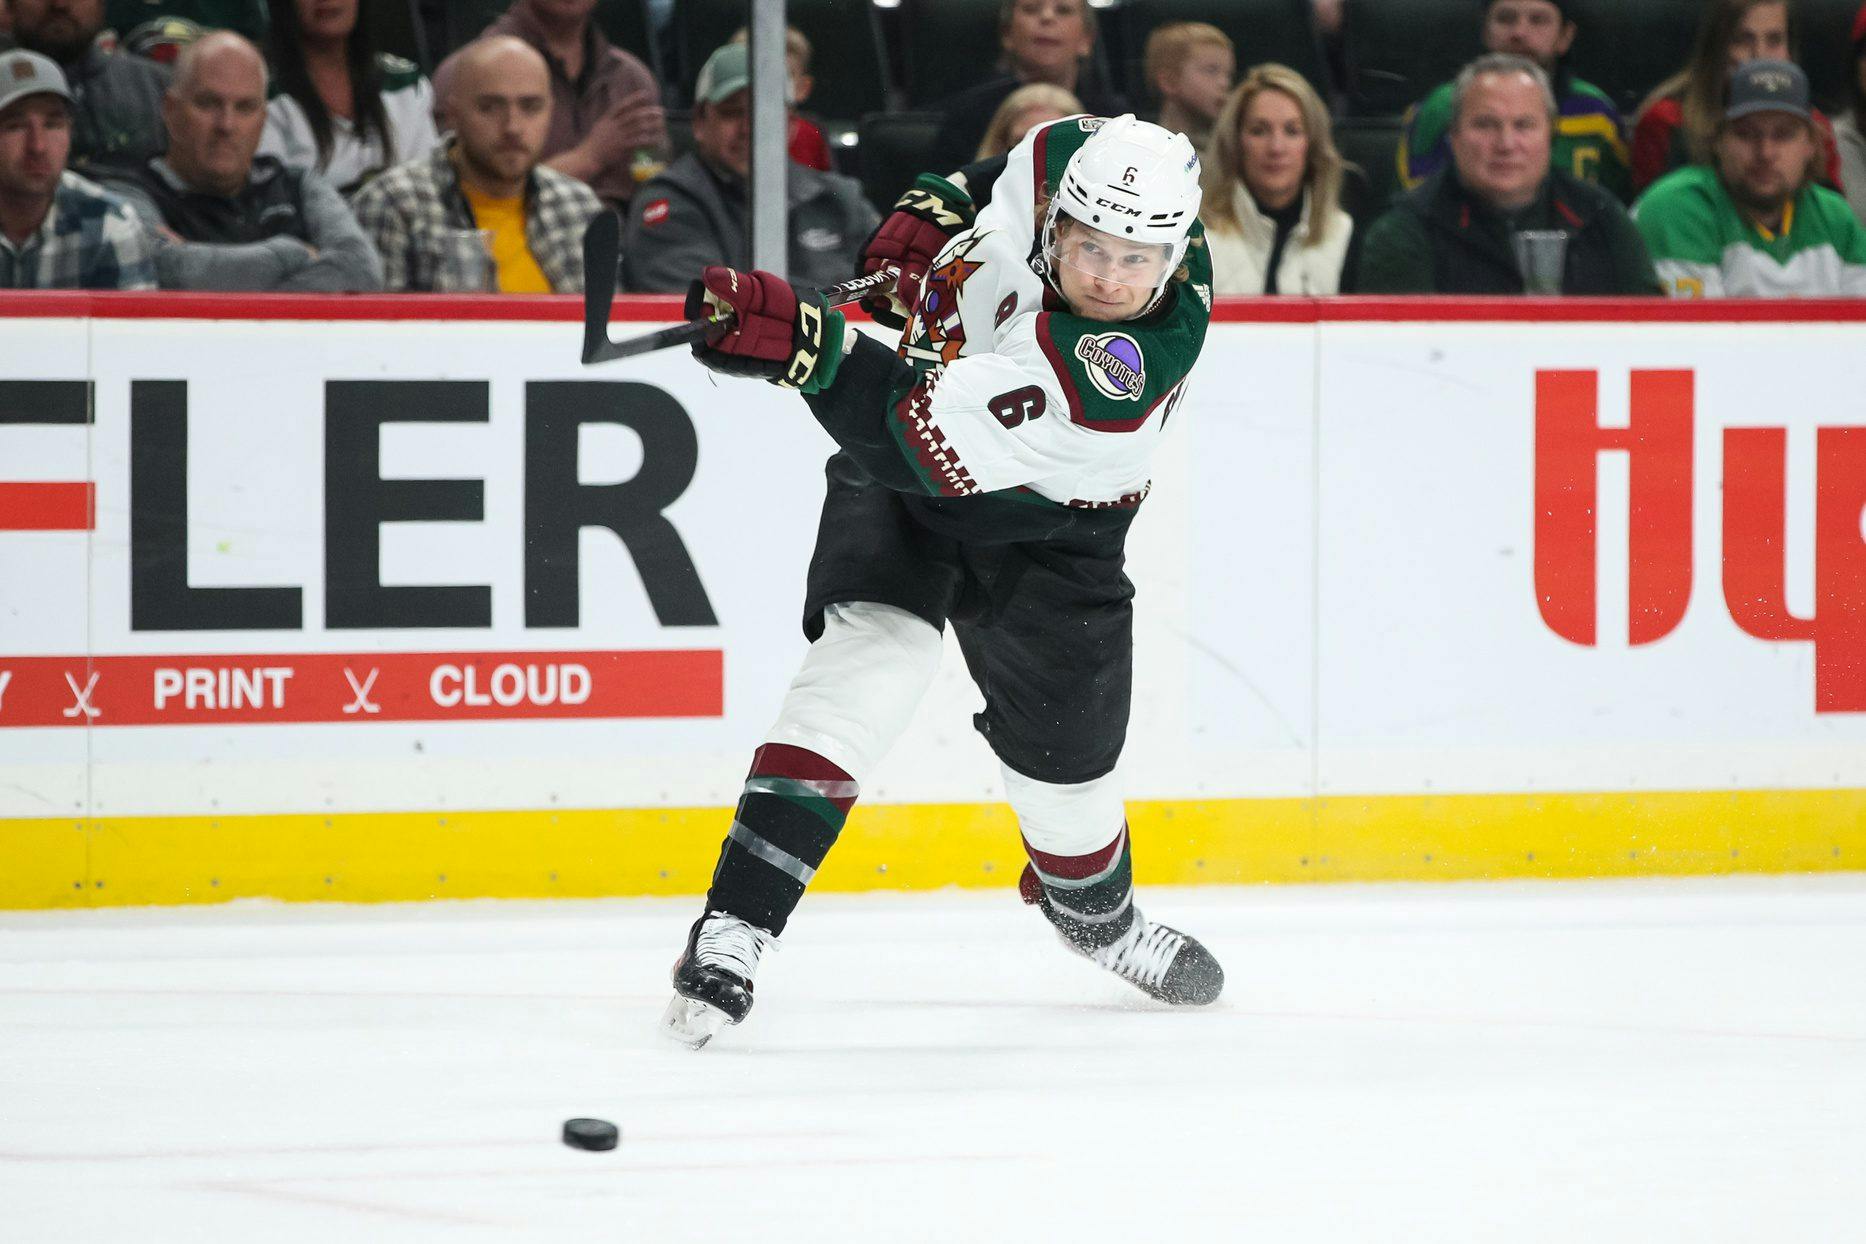 Coyotes’ Jakob Chychrun faces setback, still out week-to-week